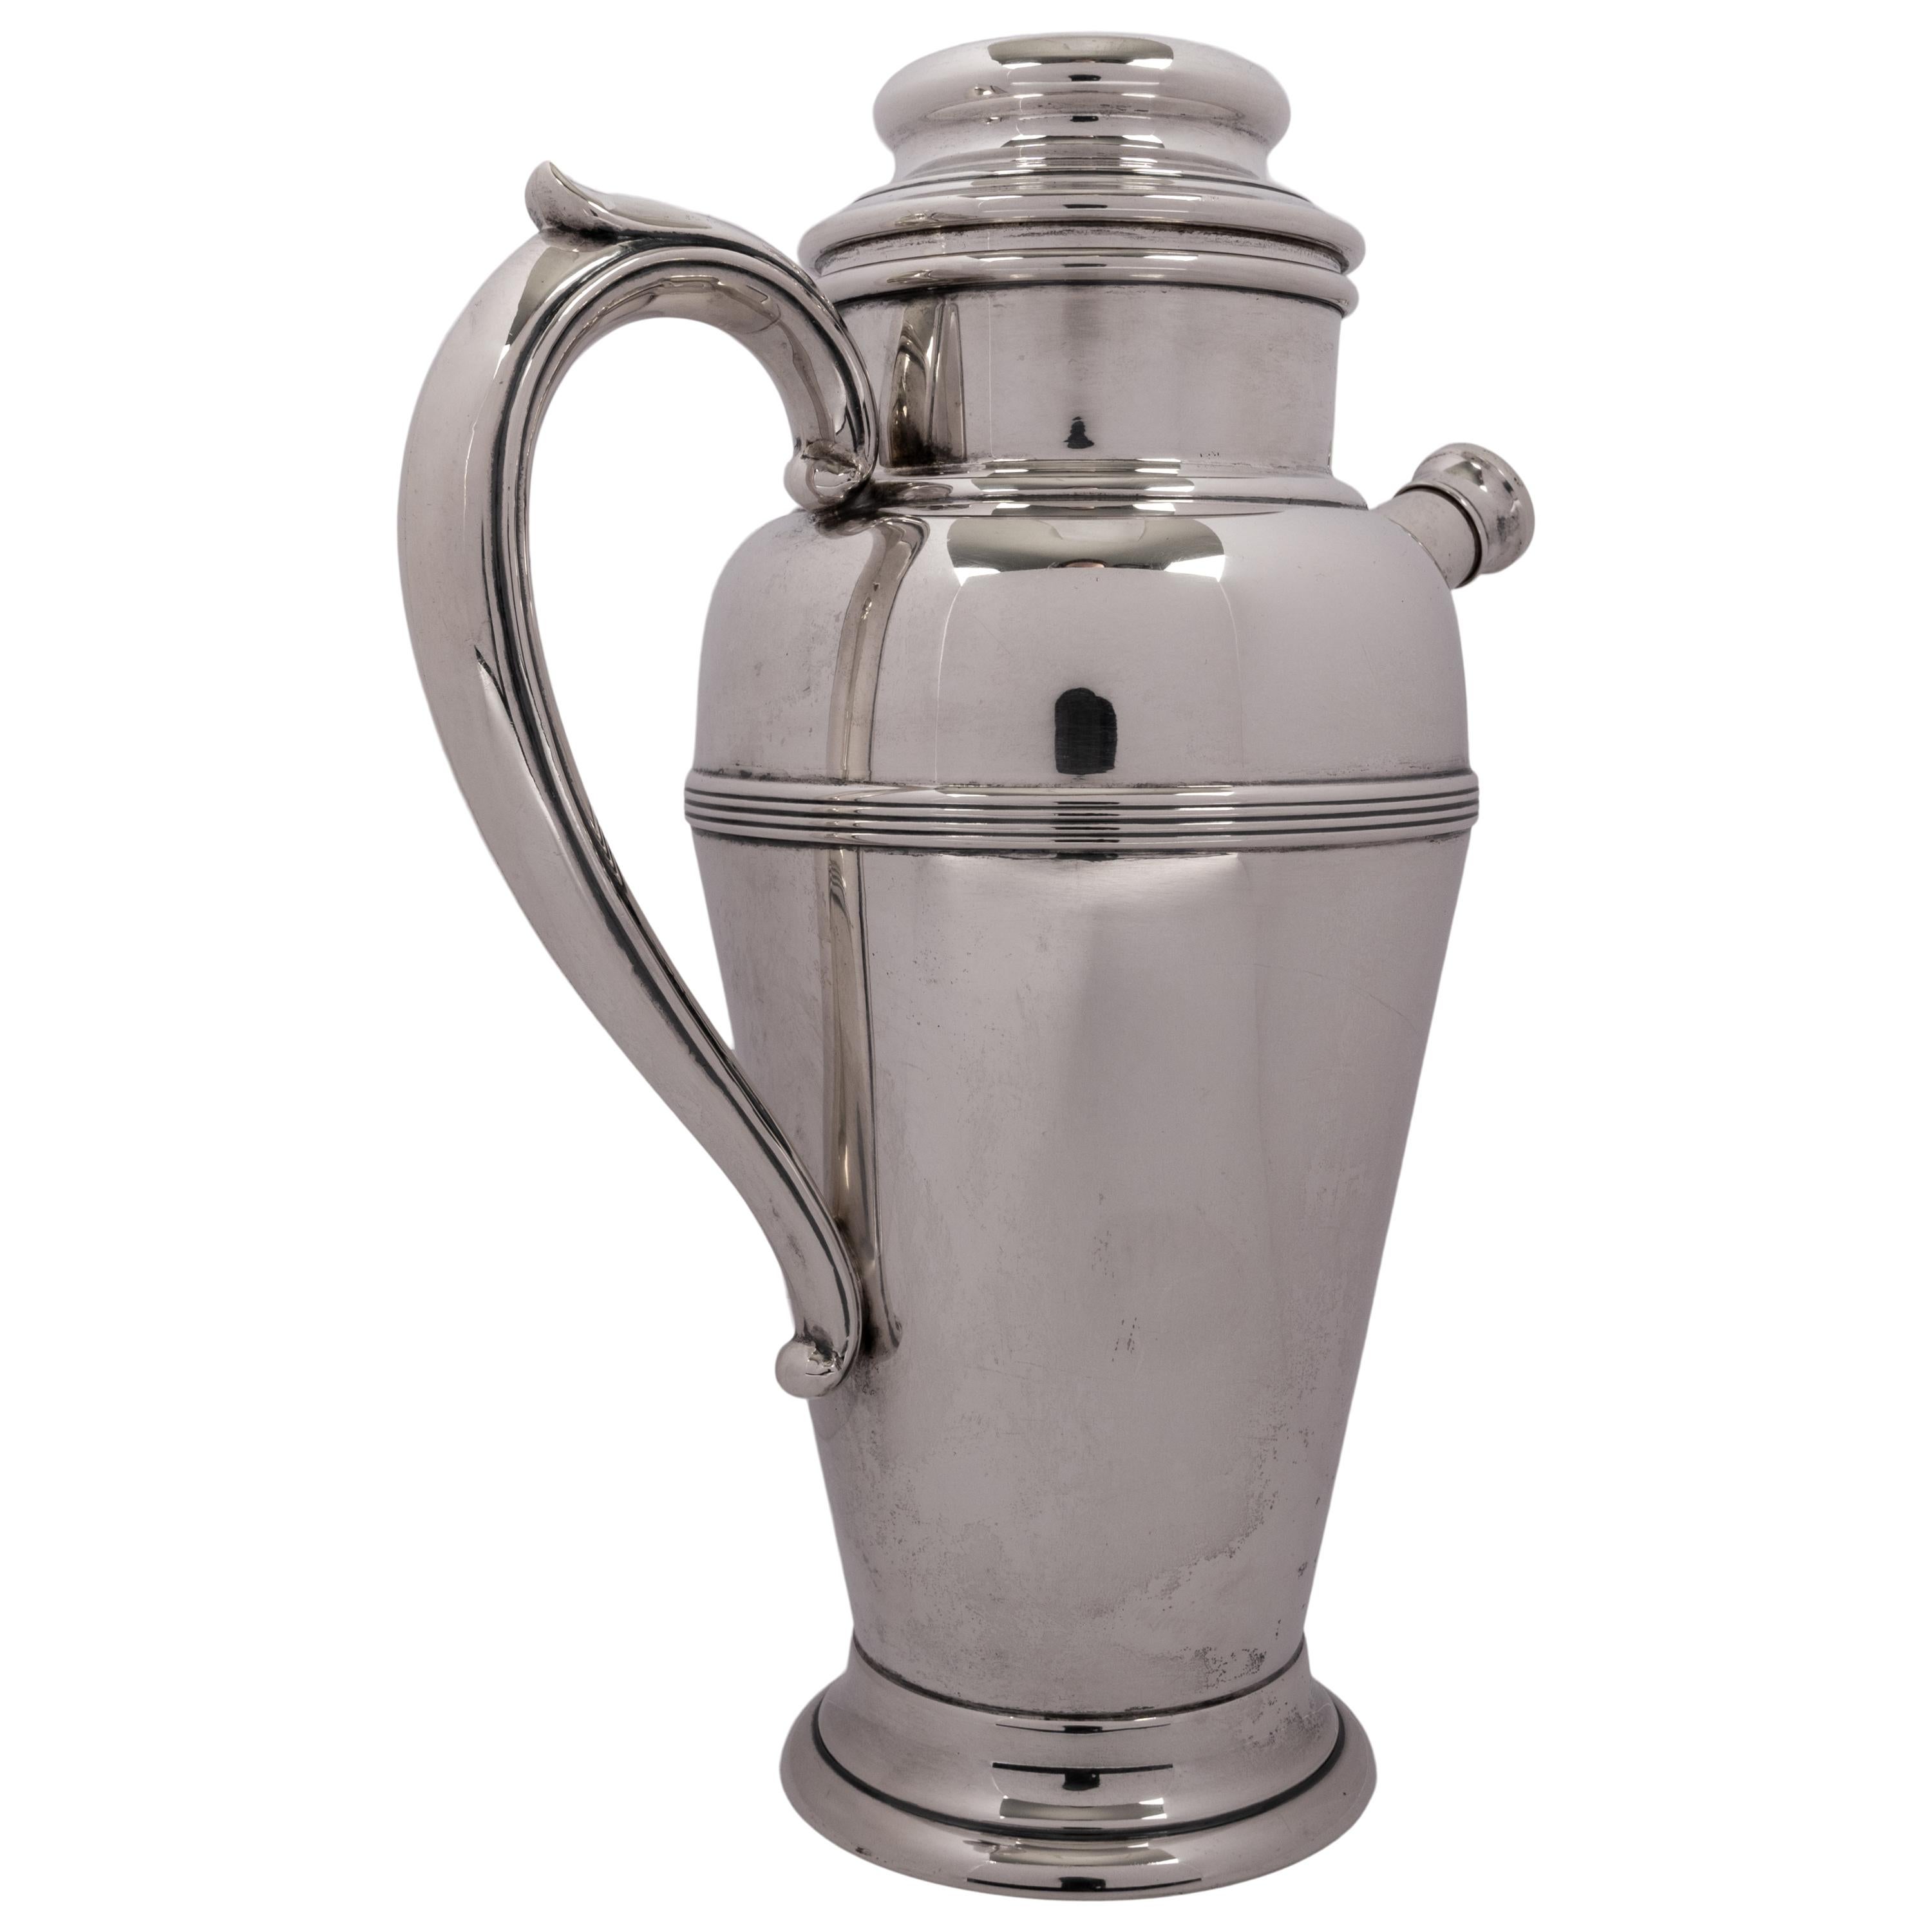 A good antique American Art Deco sterling silver cocktail Shaker and pitcher, by Fisher Silversmiths of New York, circa 1930.
The Shaker having a rounded lid with a knopped finial, to the side is a deeply flared handle exhibiting the exuberance of